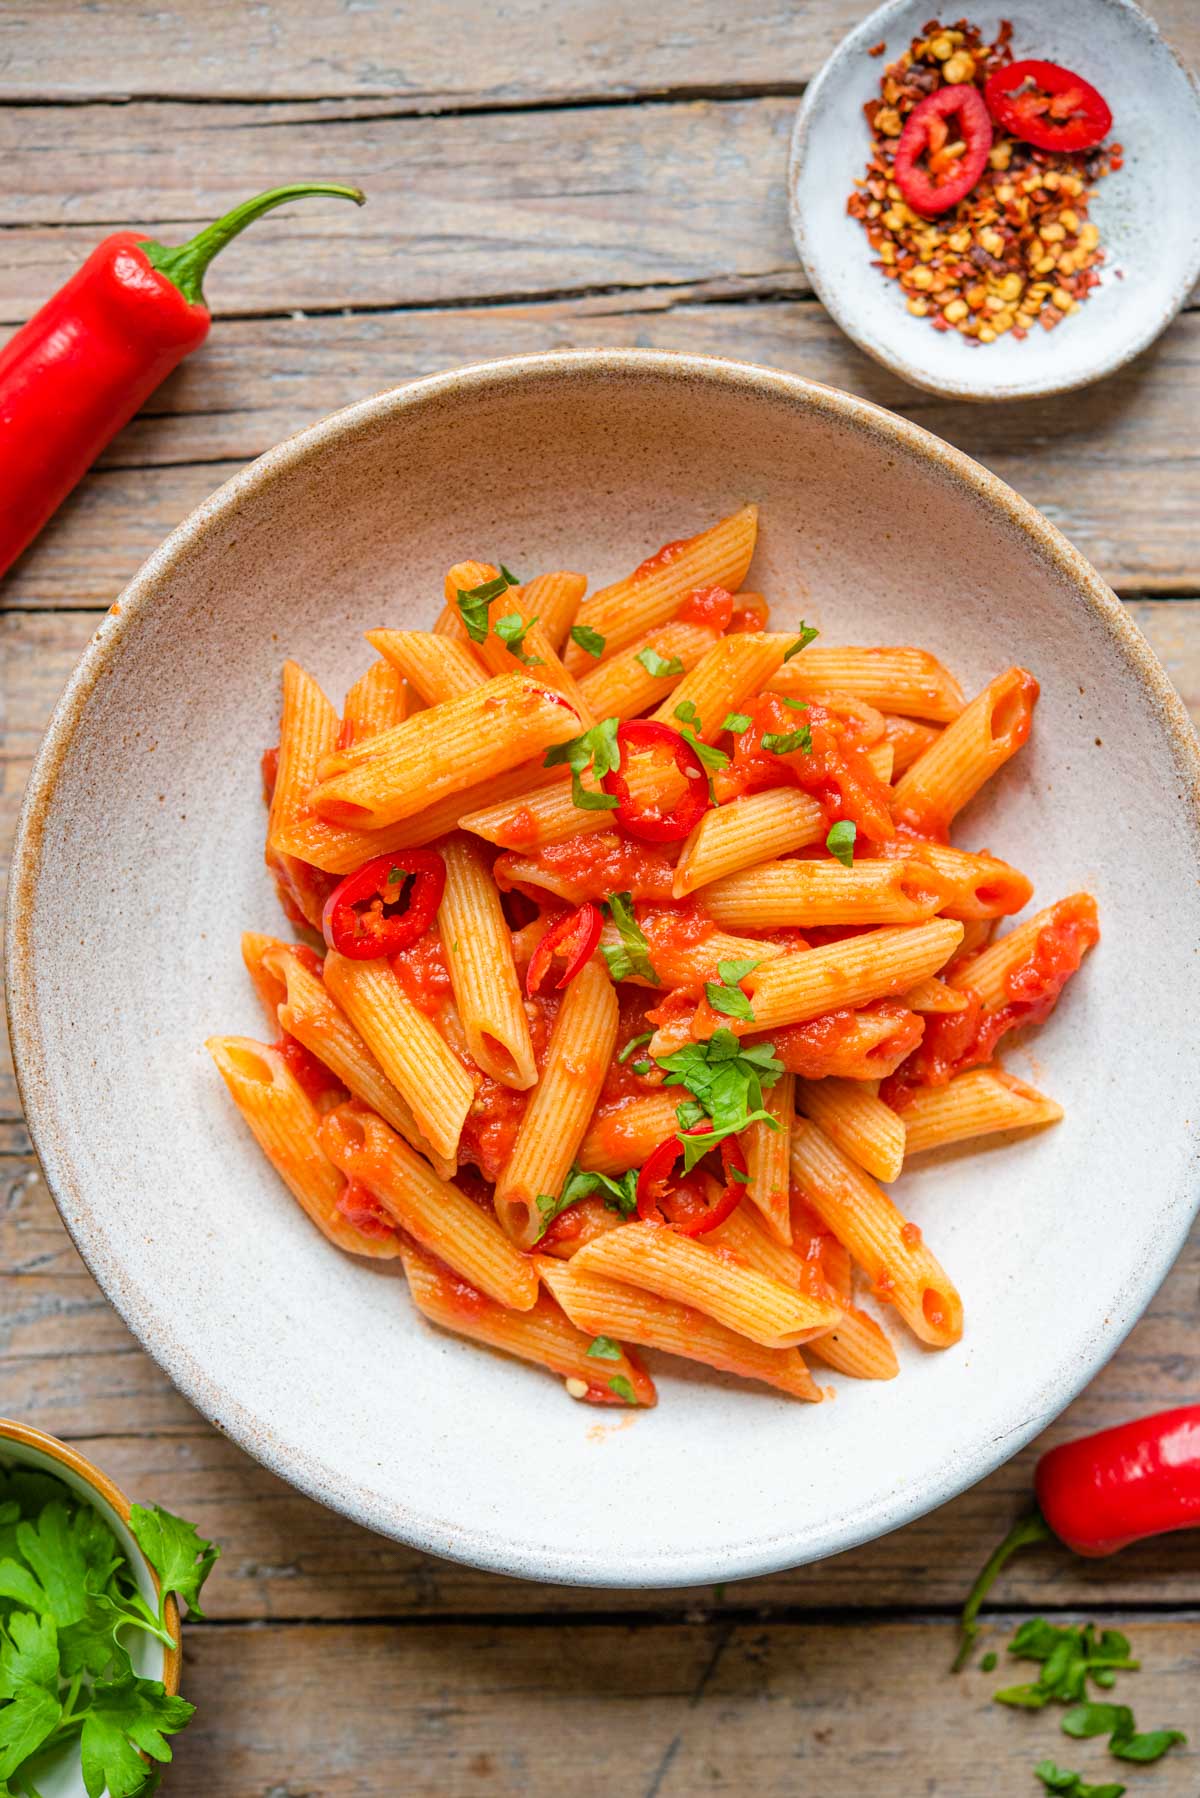 An overhead shot of penne pasta with arrabbiata sauce in a bowl